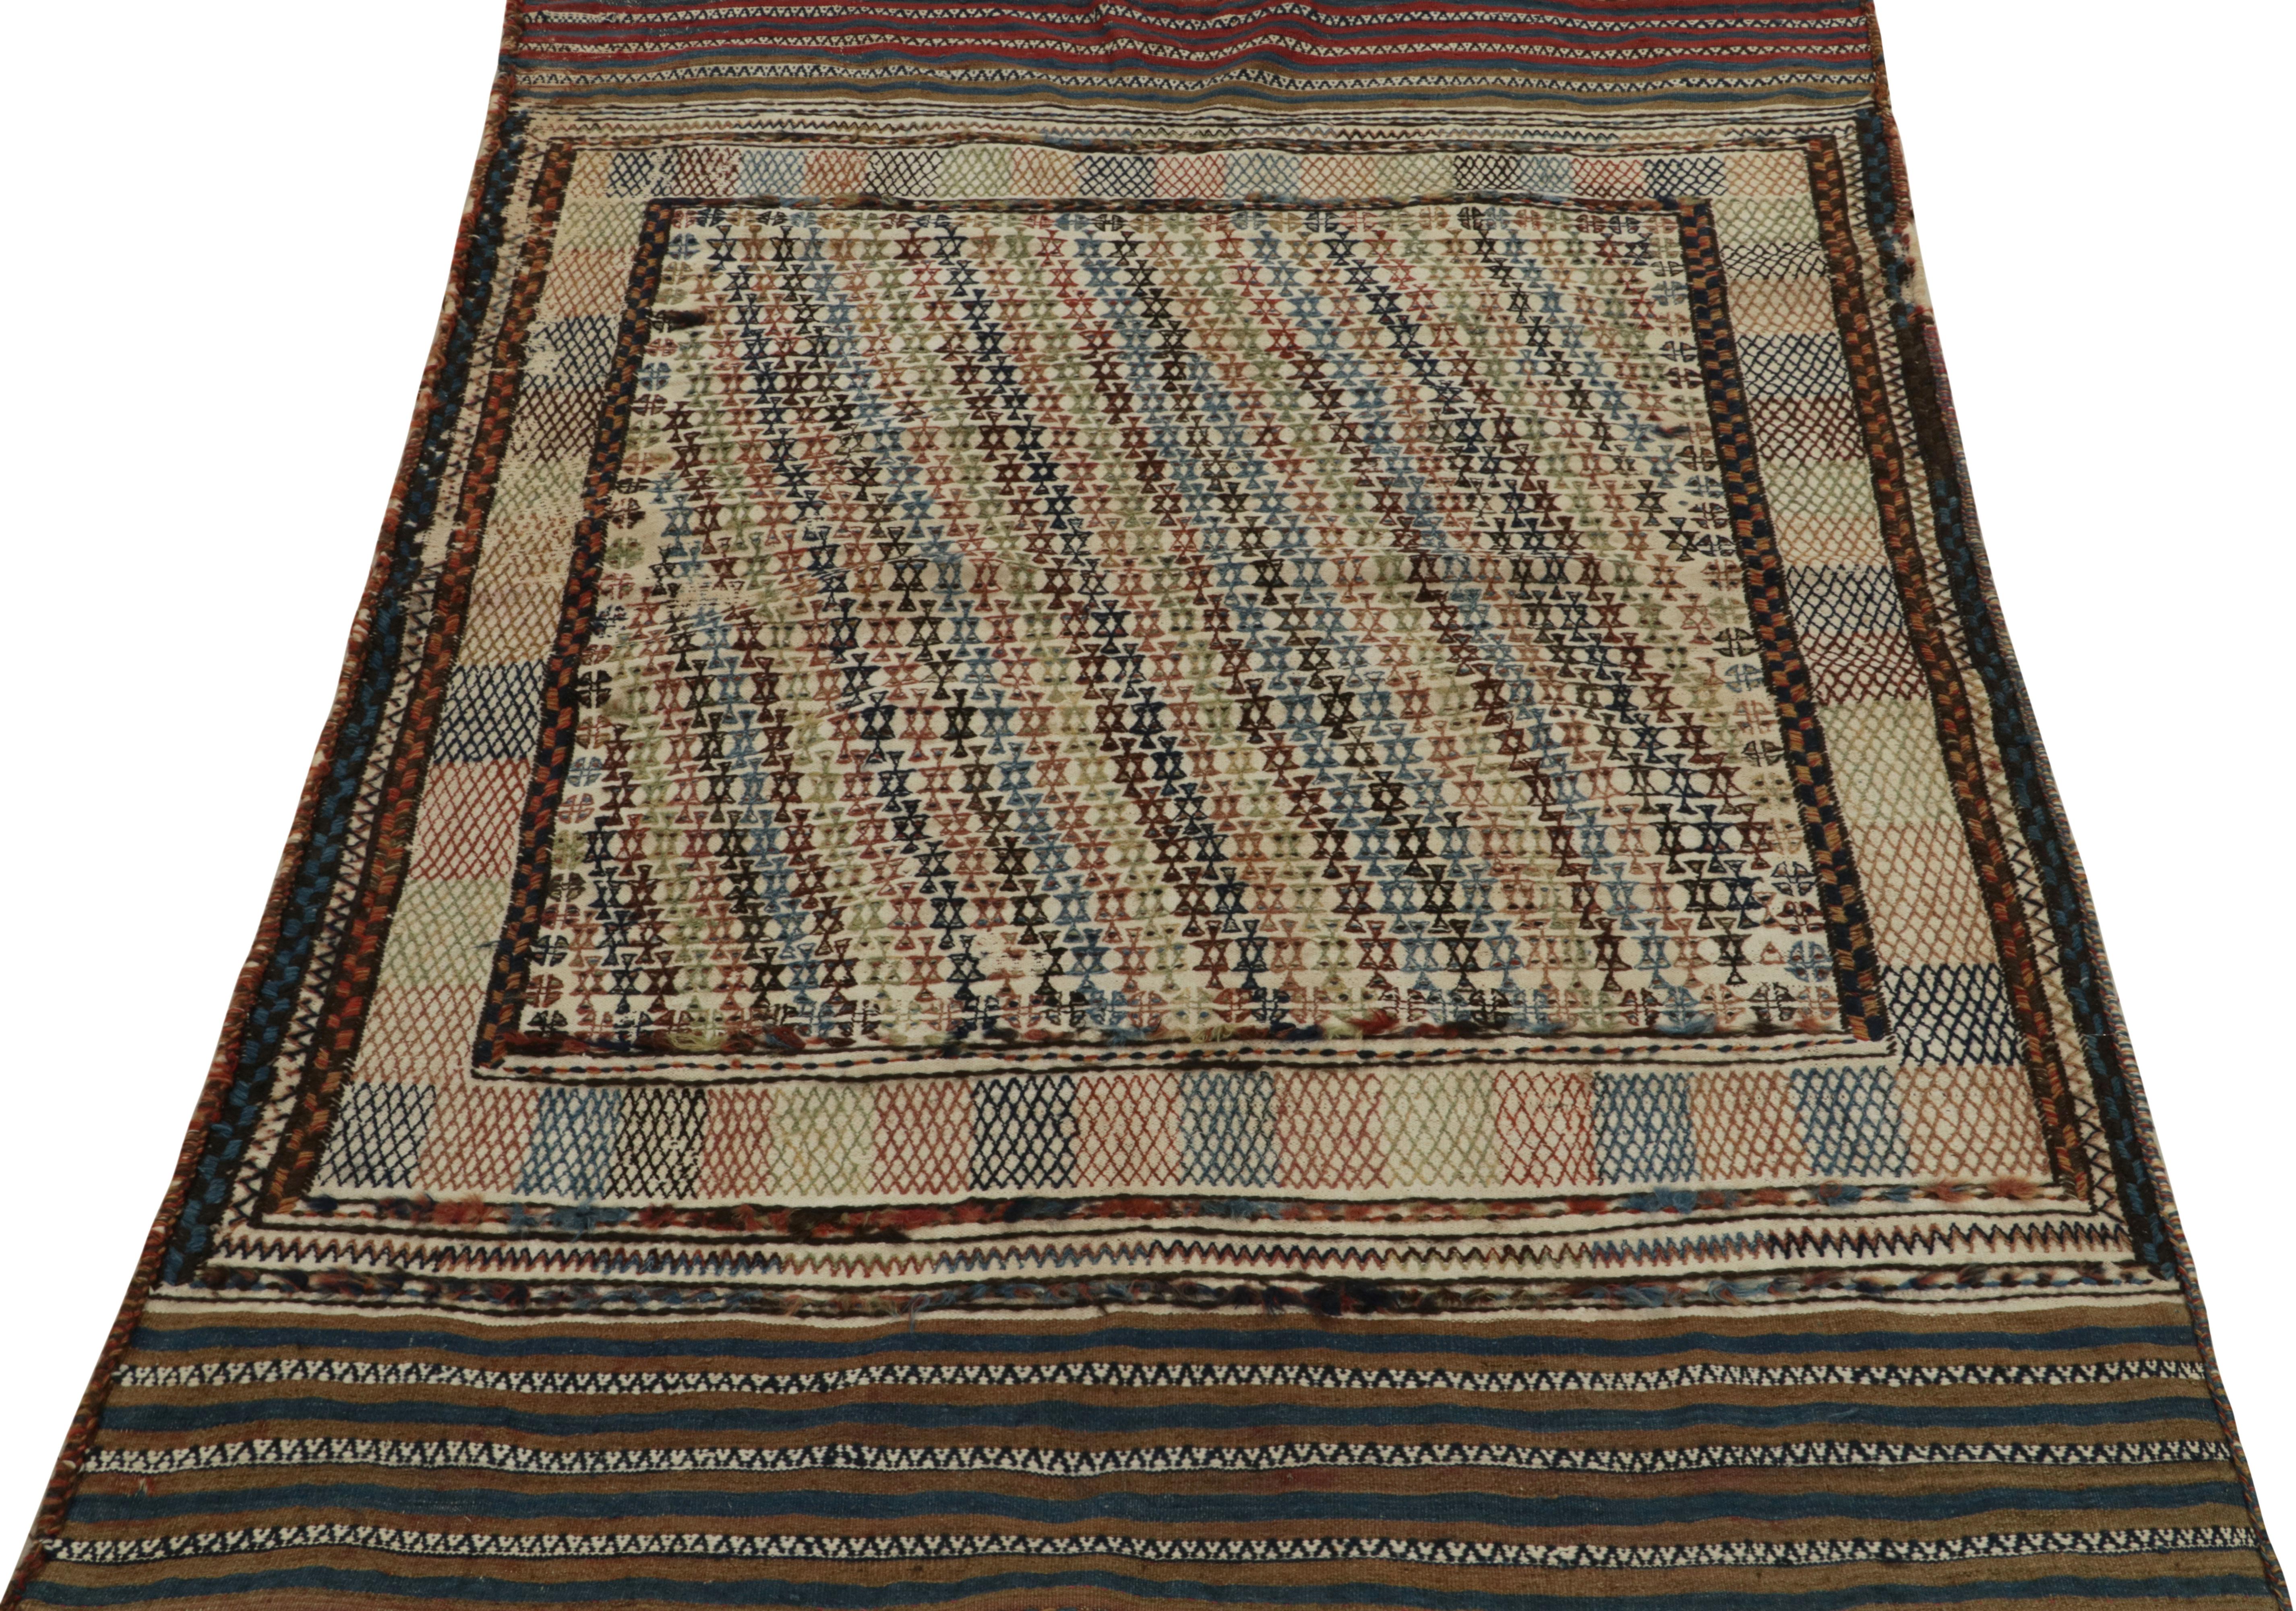 Handwoven in wool, a 4x6 Moroccan kilim rug joining our vintage flat weave selections. The rare graph dons a fabulous approach to color with handsome beige-brown, green & blue with white juxtapositions intricately interrupting the tribal pattern for